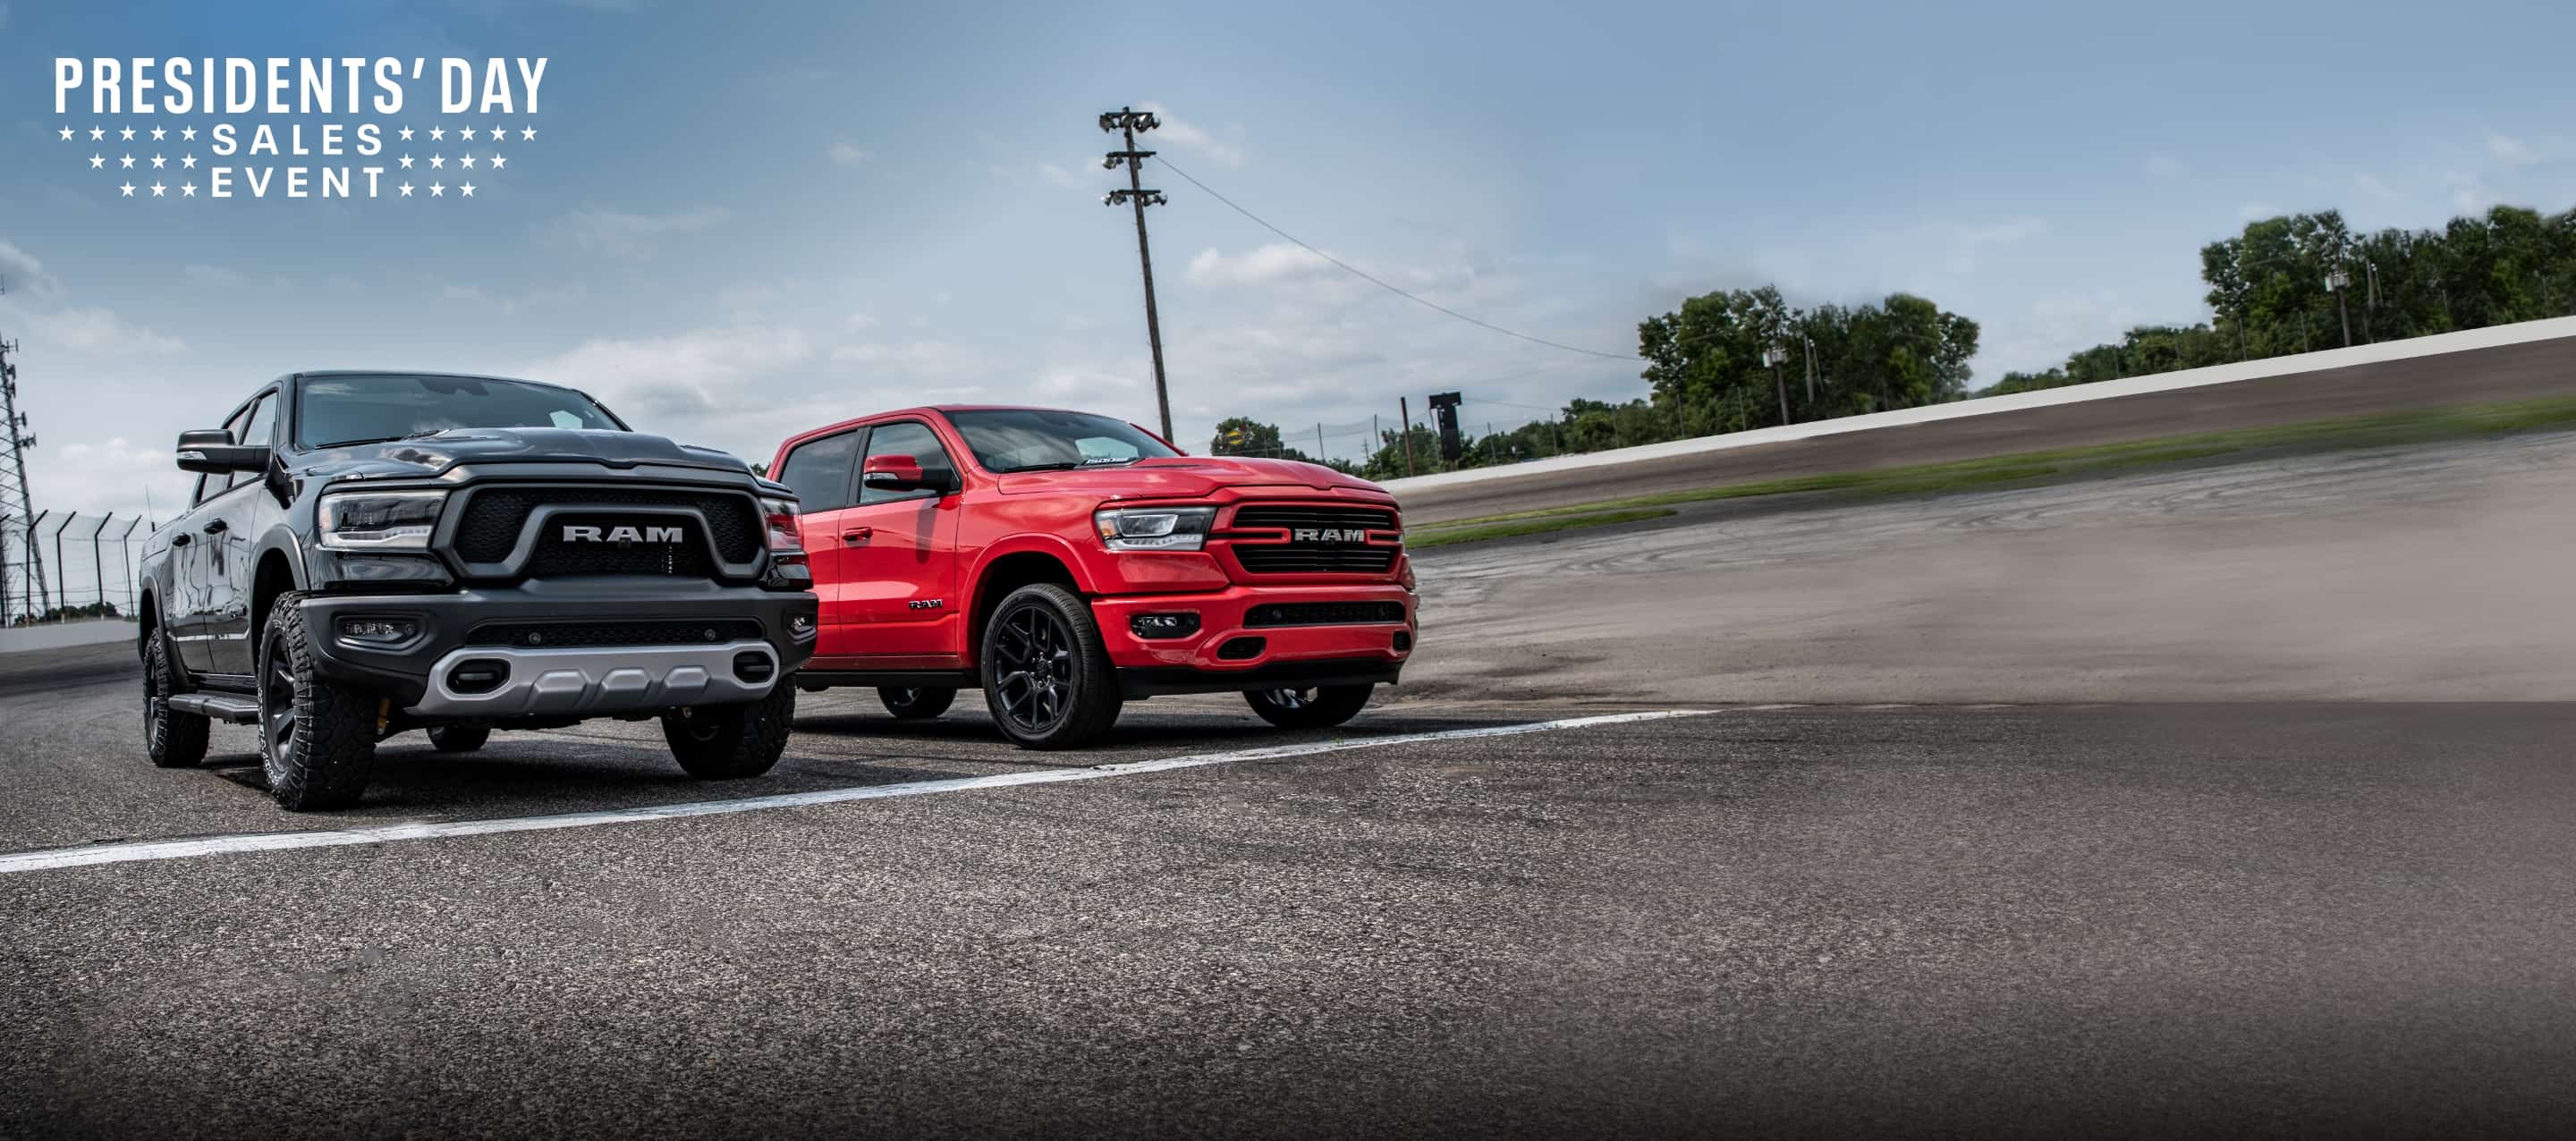 A black 2022 Ram 1500 Rebel and a red 2022 Ram 1500 Laramie at the starting line of a racetrack. The Presidents' Day Sales Event logo.